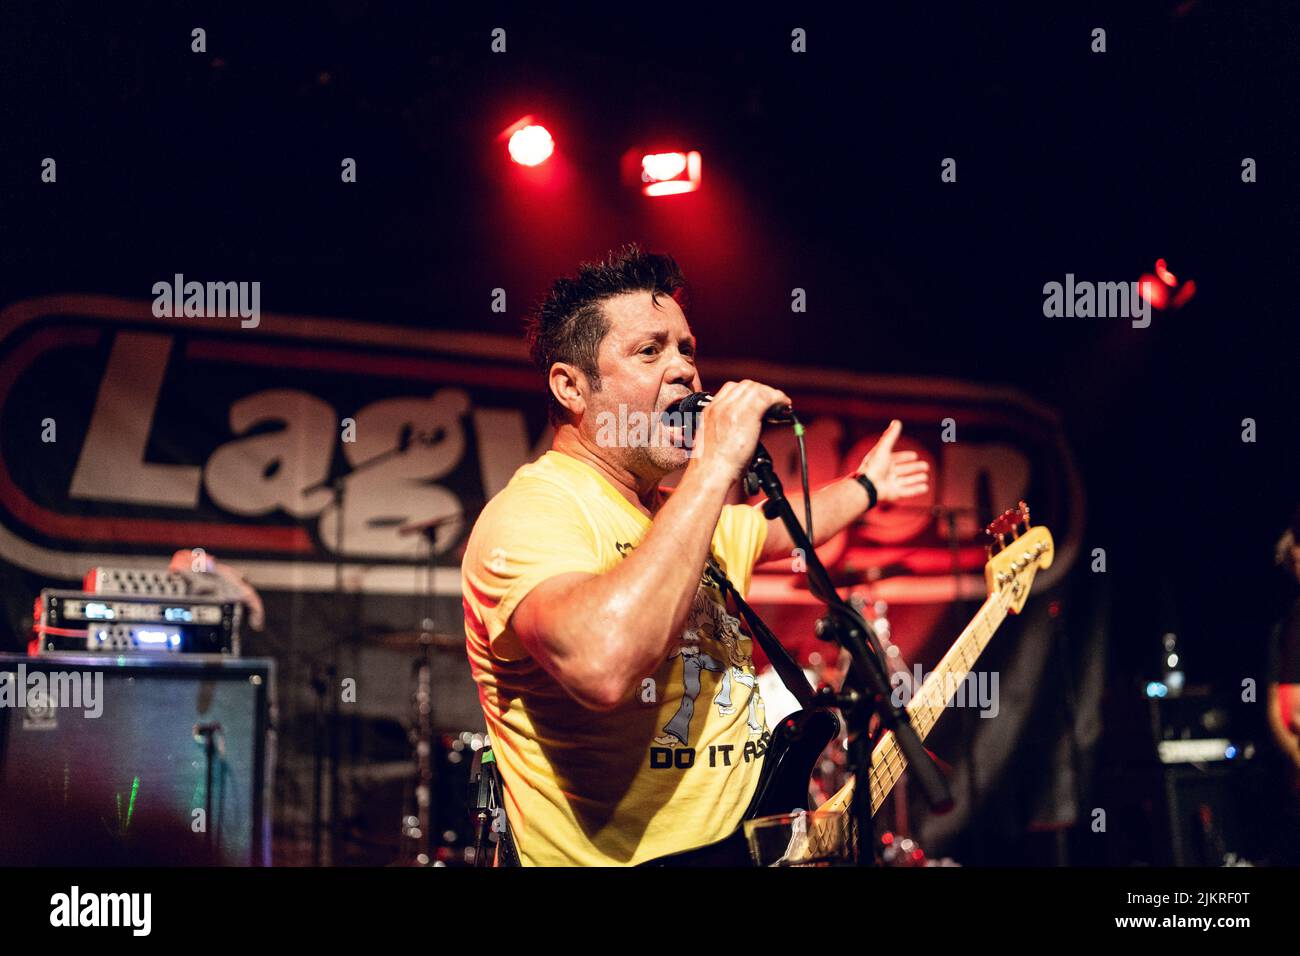 Copenhagen, Denmark. 31st, July 2022. The American punk rock band Lagwagon  performs a live concert at Hotel Cecil in Copenhagen. Here bass player Joe  Raposo is seen live on stage. (Photo credit: